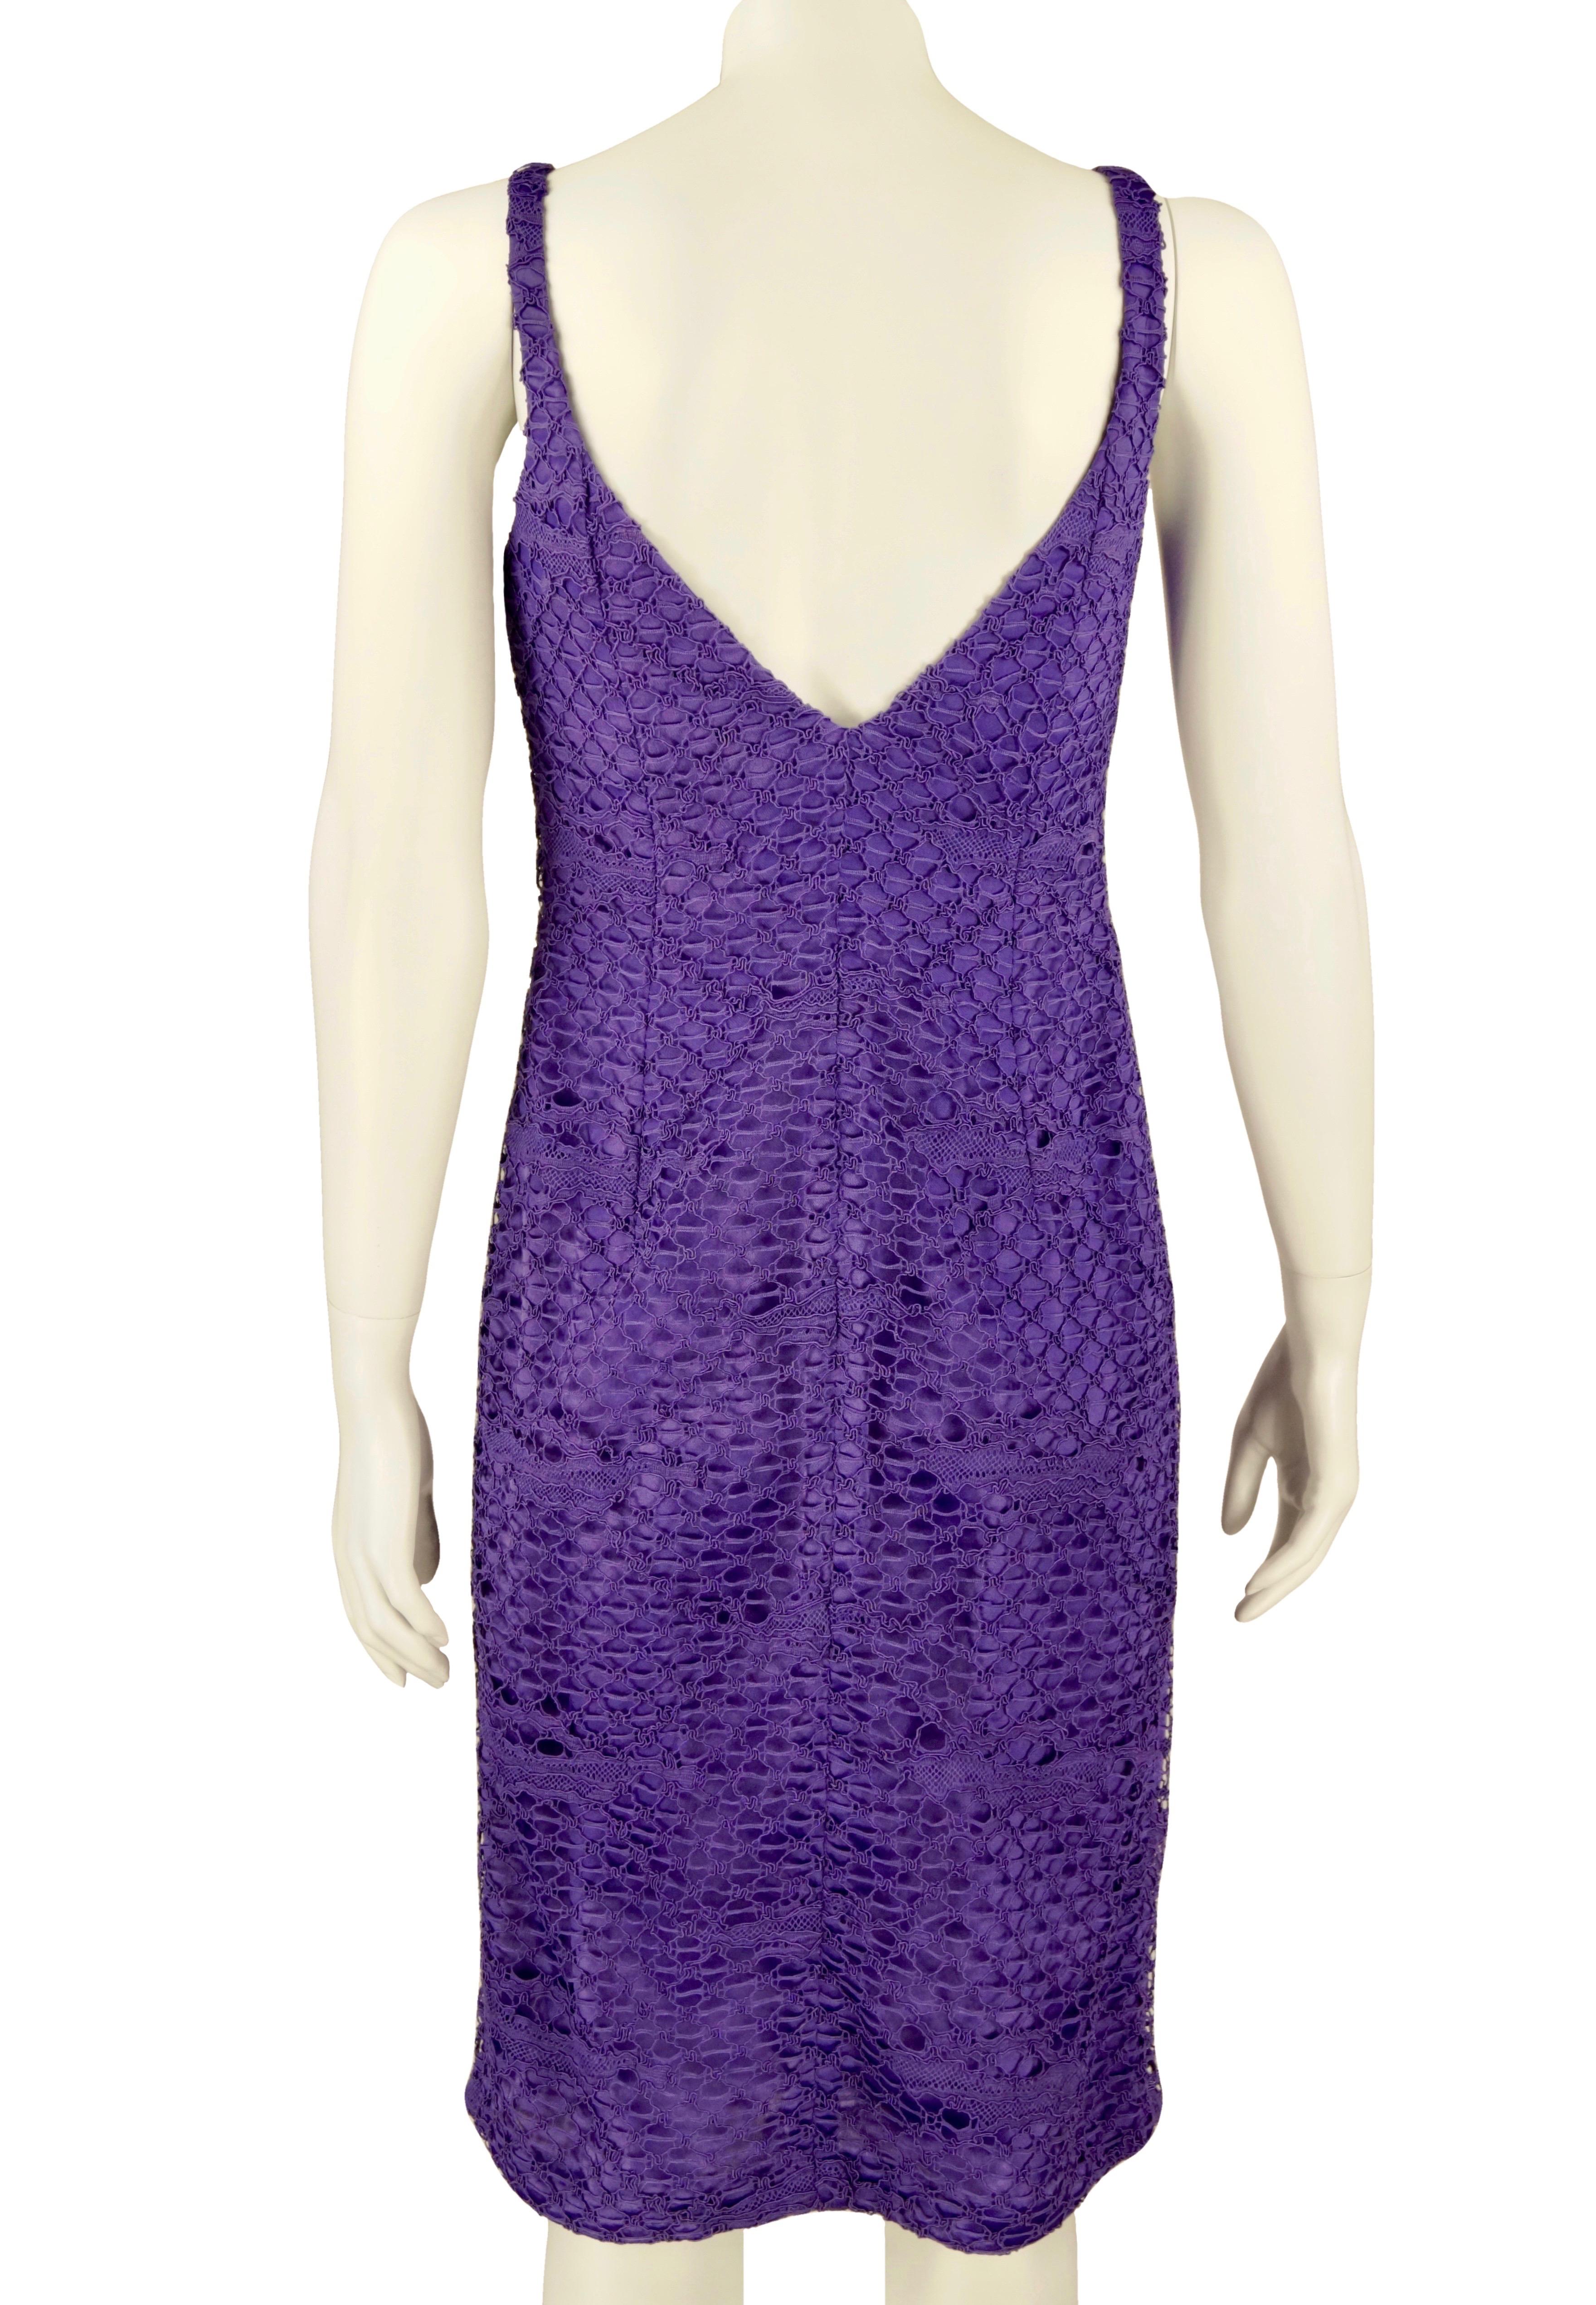 Gianni Versace Couture purple lace dress For Sale 4